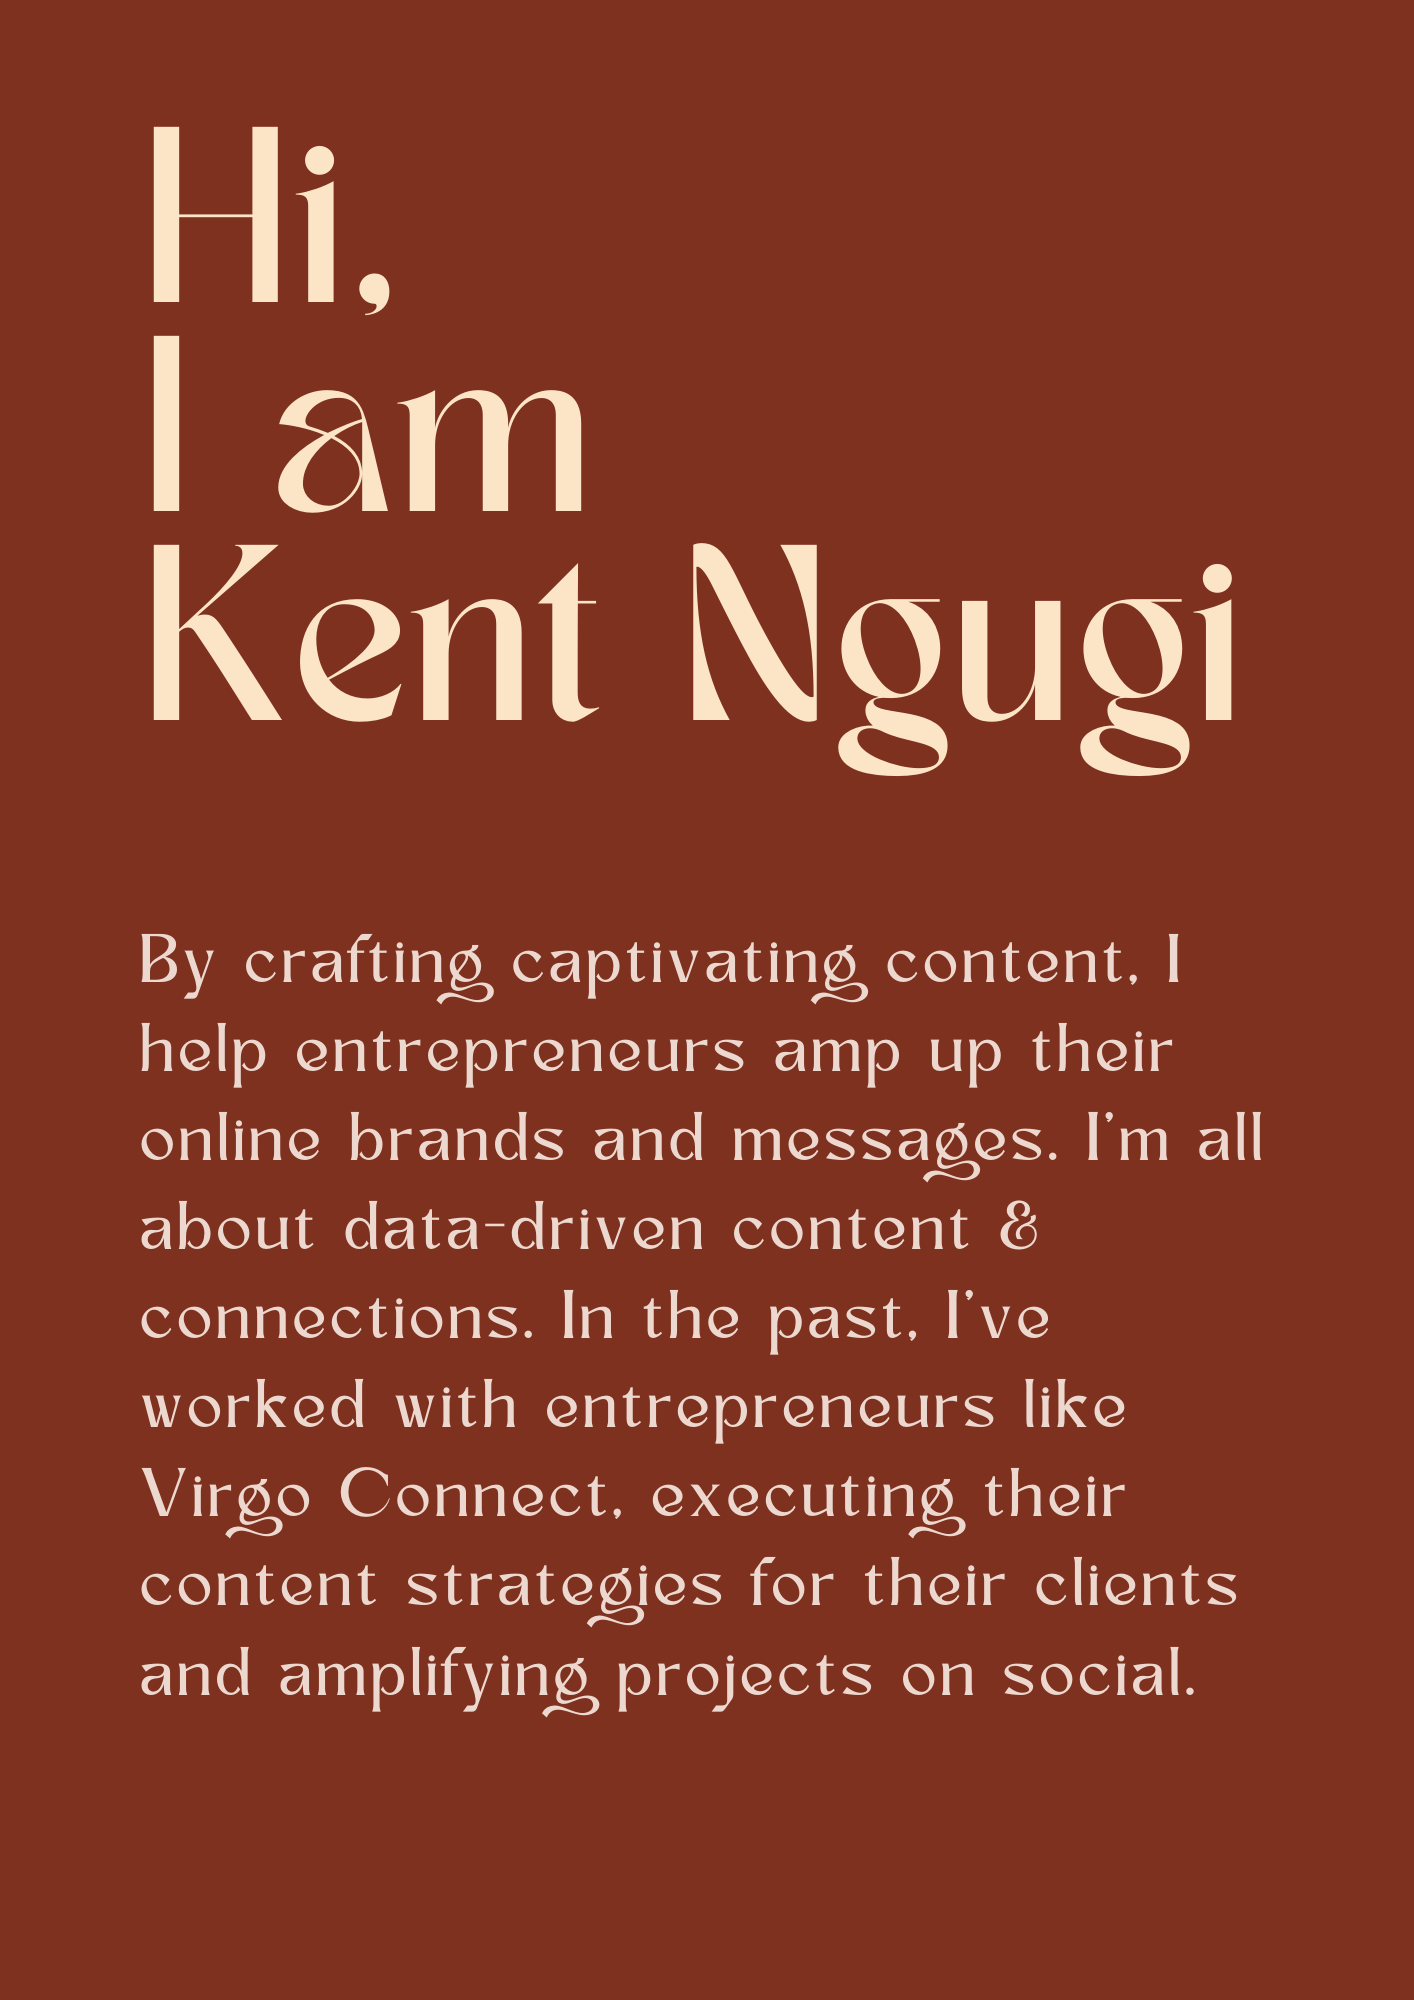 Hi.
Kl
Kent NQugi

By crafting captivating content. |
help entrepreneurs amp up their
online brands and messages. I'm all
about data-driven content &amp;
connections. In the past. I've
worked with entrepreneurs like
Virgo Connect. executing, their
content strategjes for their clients
and amplifying projects on social.